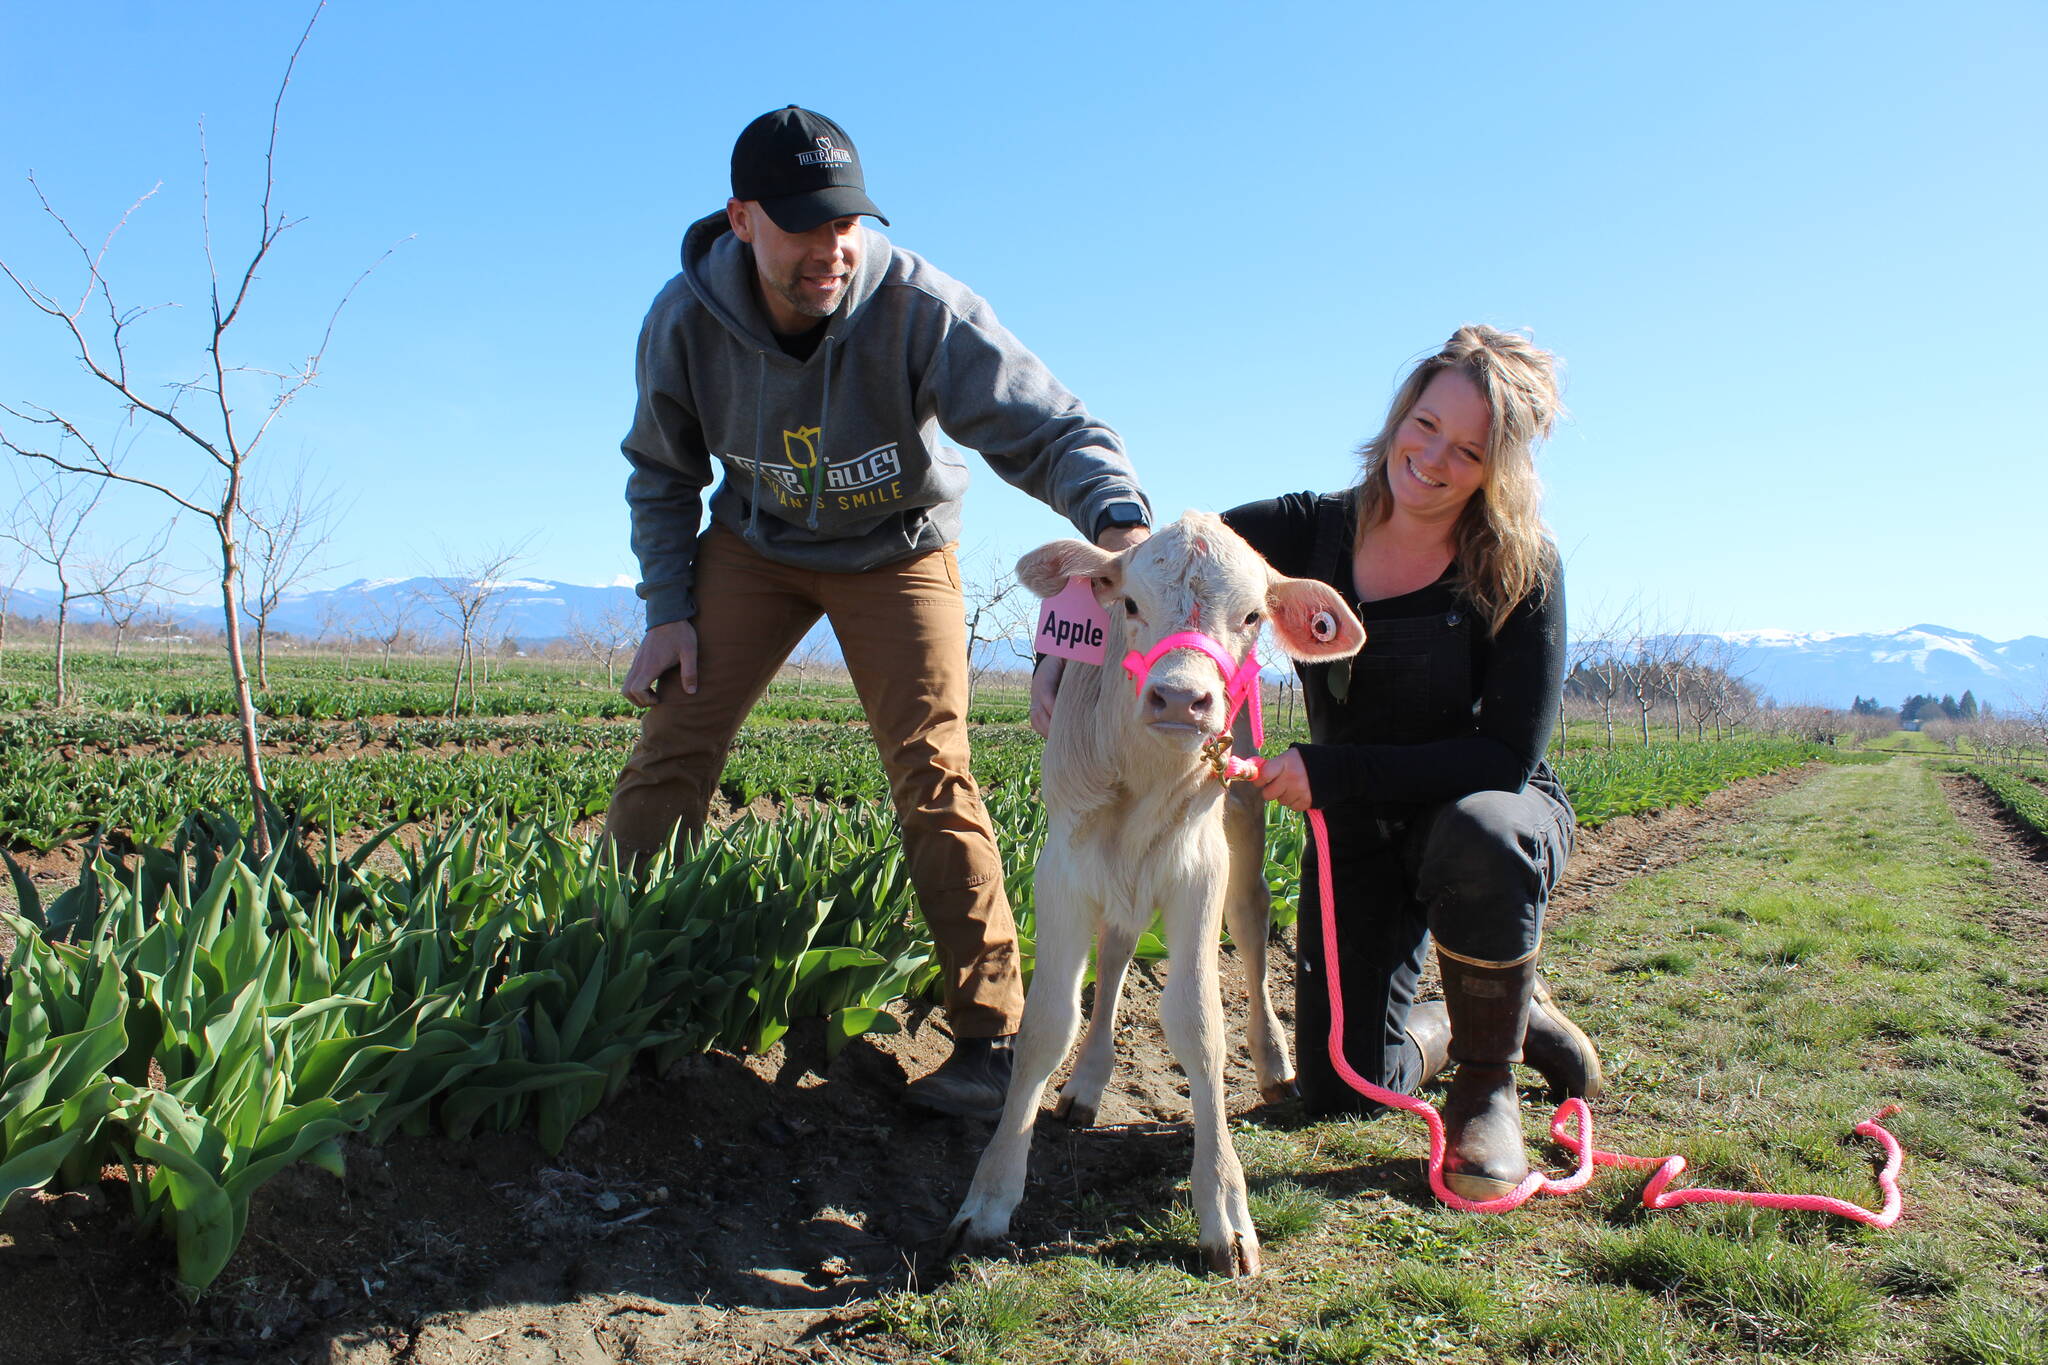 Andrew Miller of Tulip Valley Farms and Shannon Hamilton of Whidbey Farm and Market will collaborate to provide an interactive farm animal experience at this year’s Skagit Valley Tulip Festival. (Photo by Karina Andrew/Whidbey News-Times)